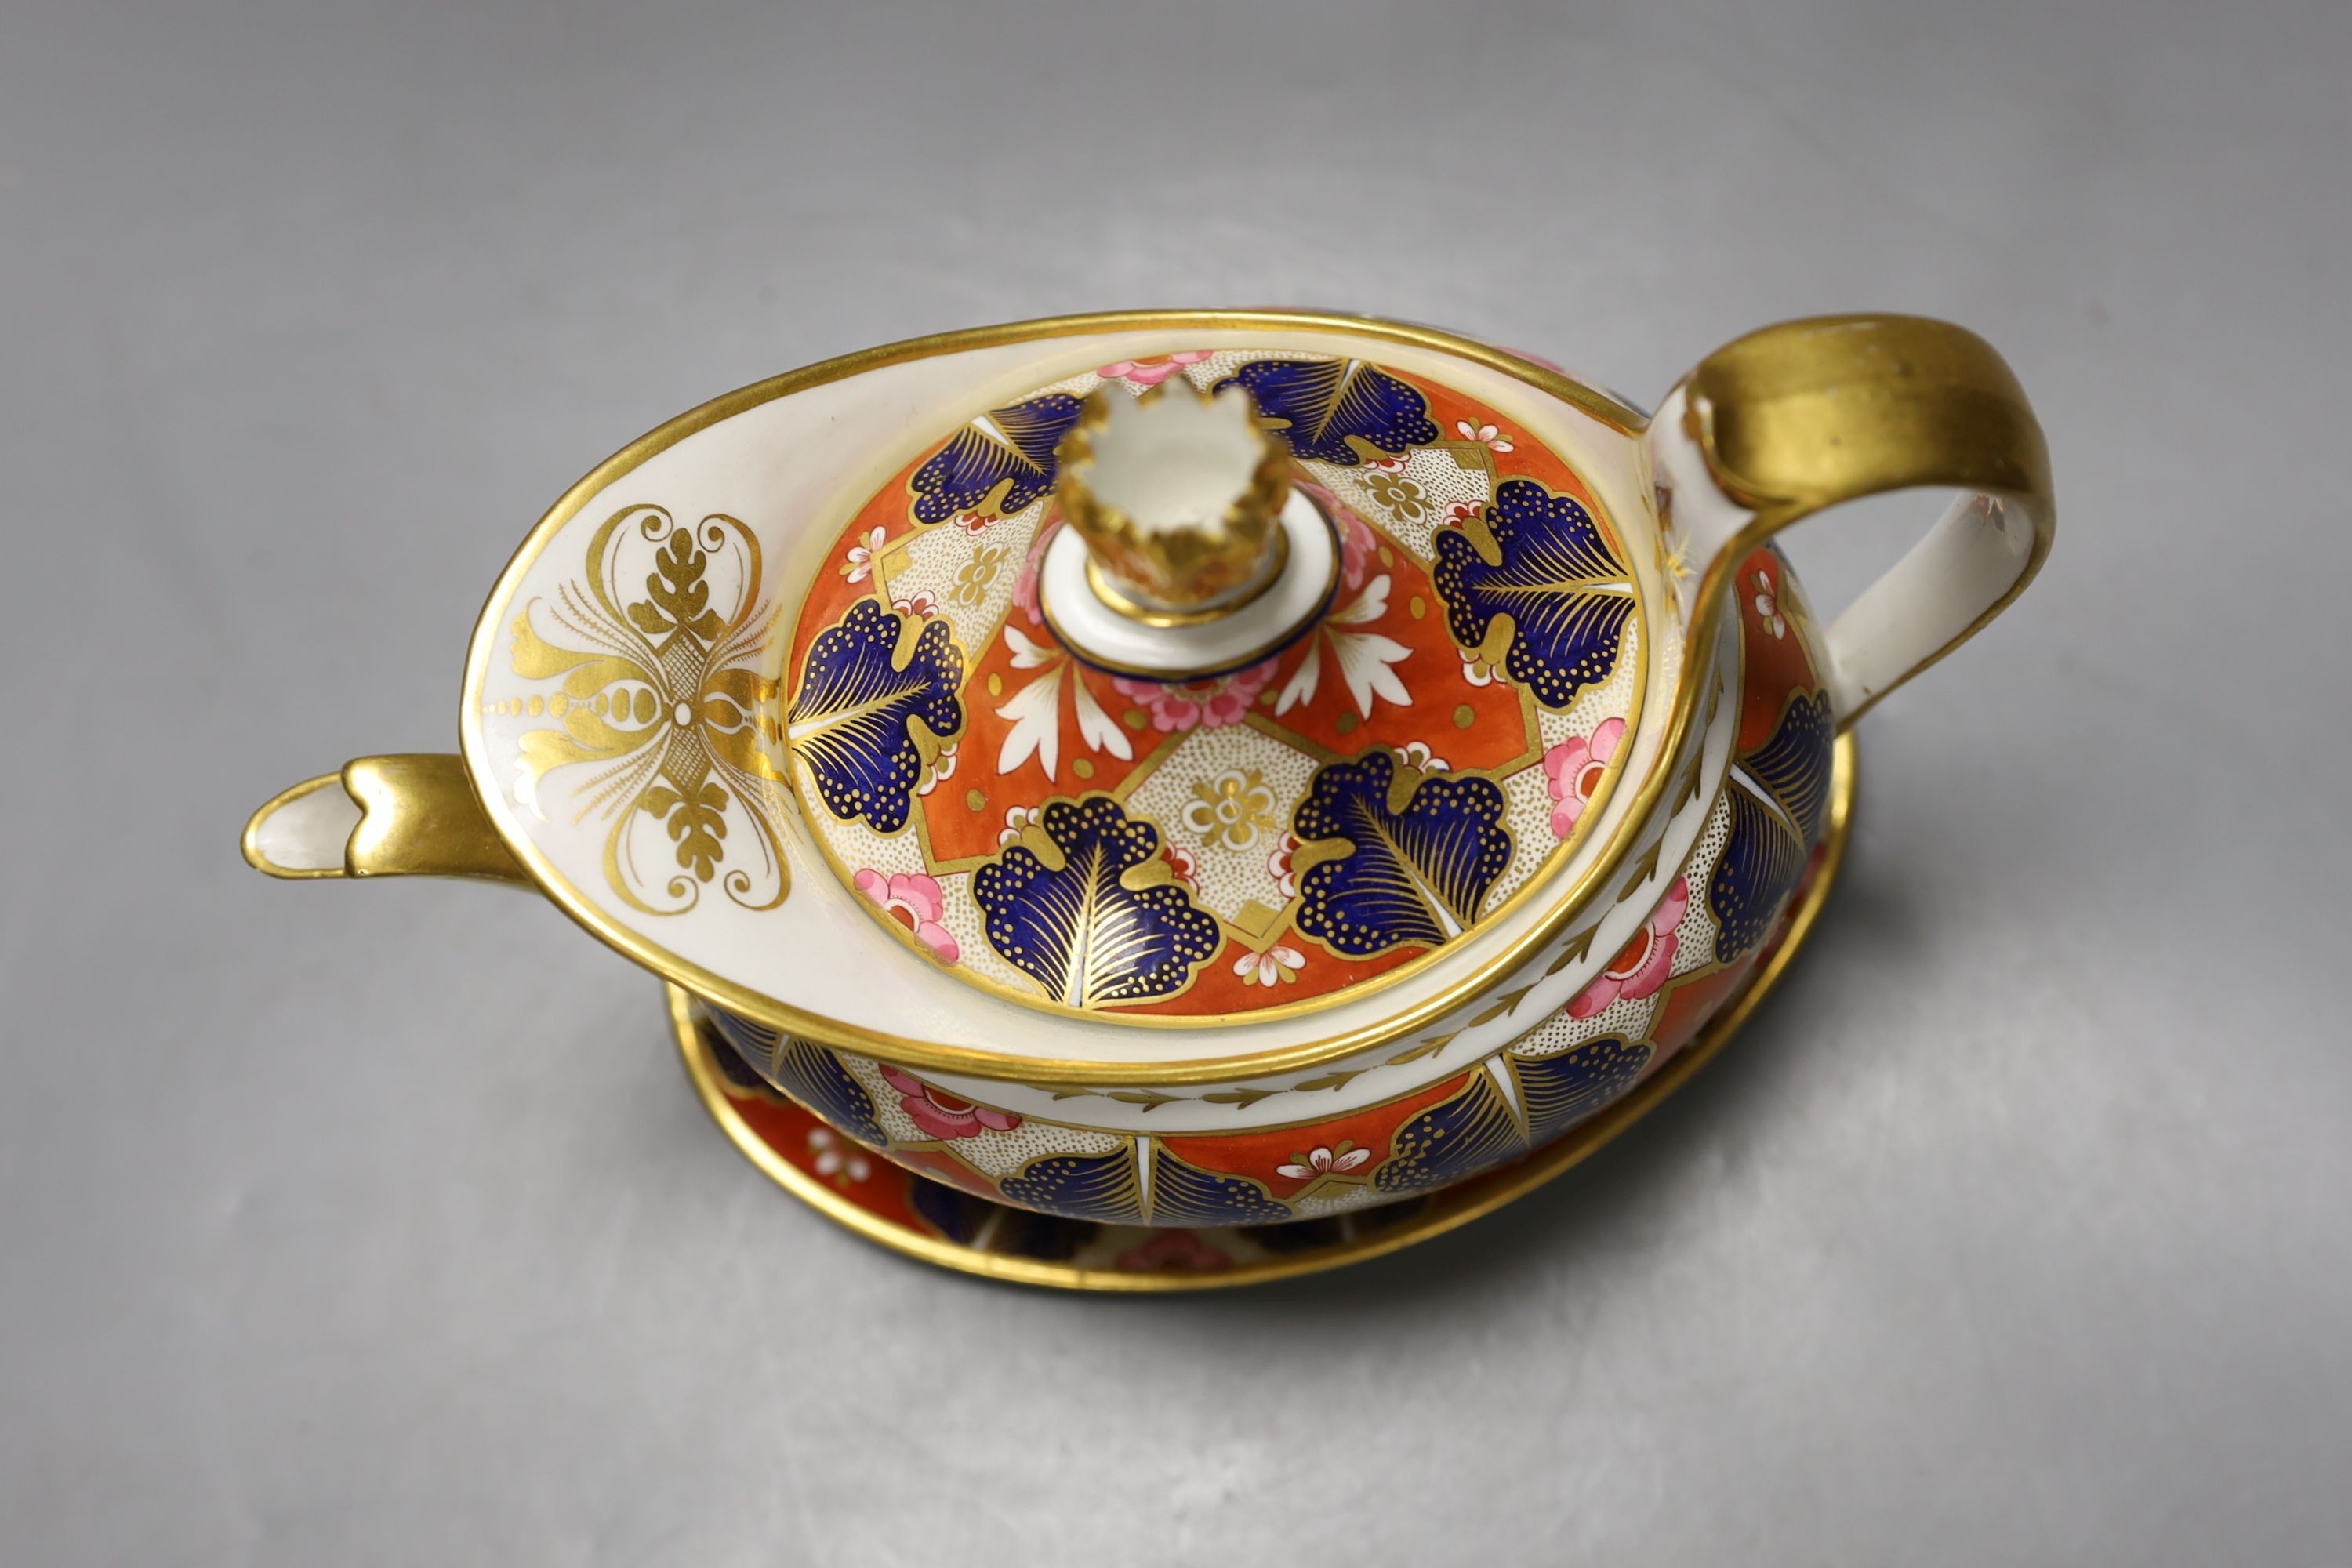 A Barr Flight and Barr Worcester teapot cover and stand painted with an Imari pattern, c.1805, 23 cm long